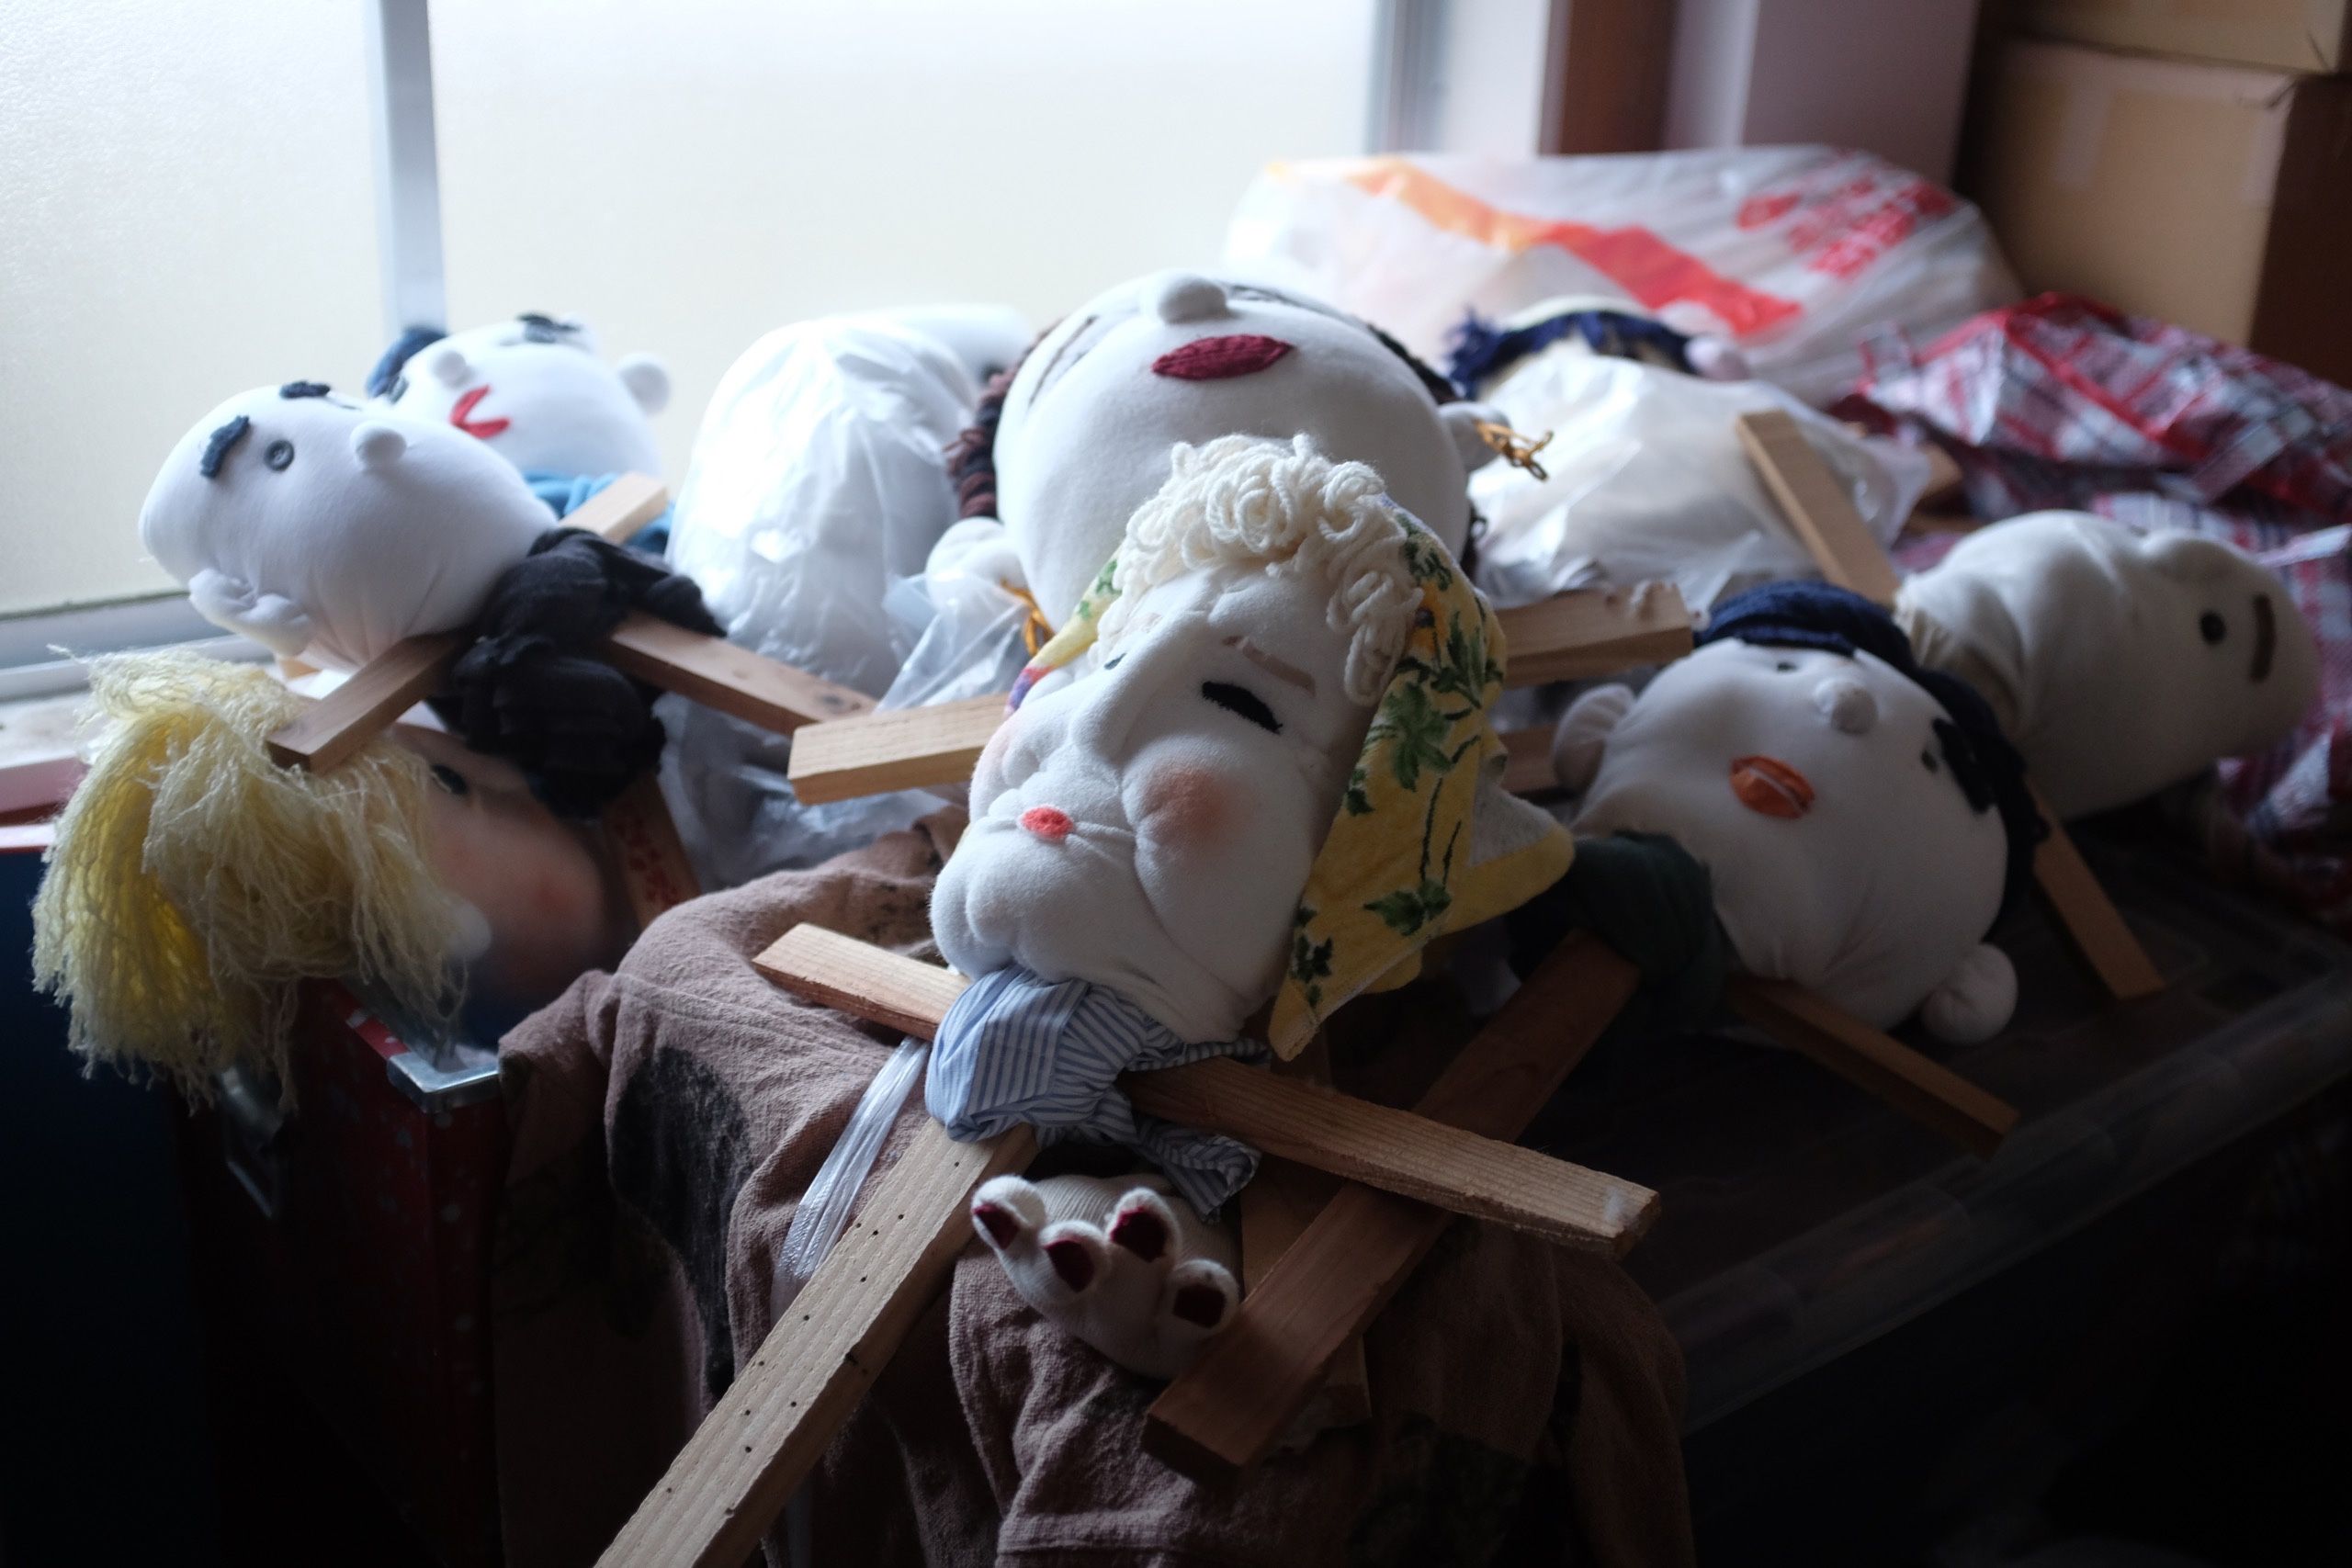 A pile of unfinished doll heads, with wooden supports for shoulders and spines.